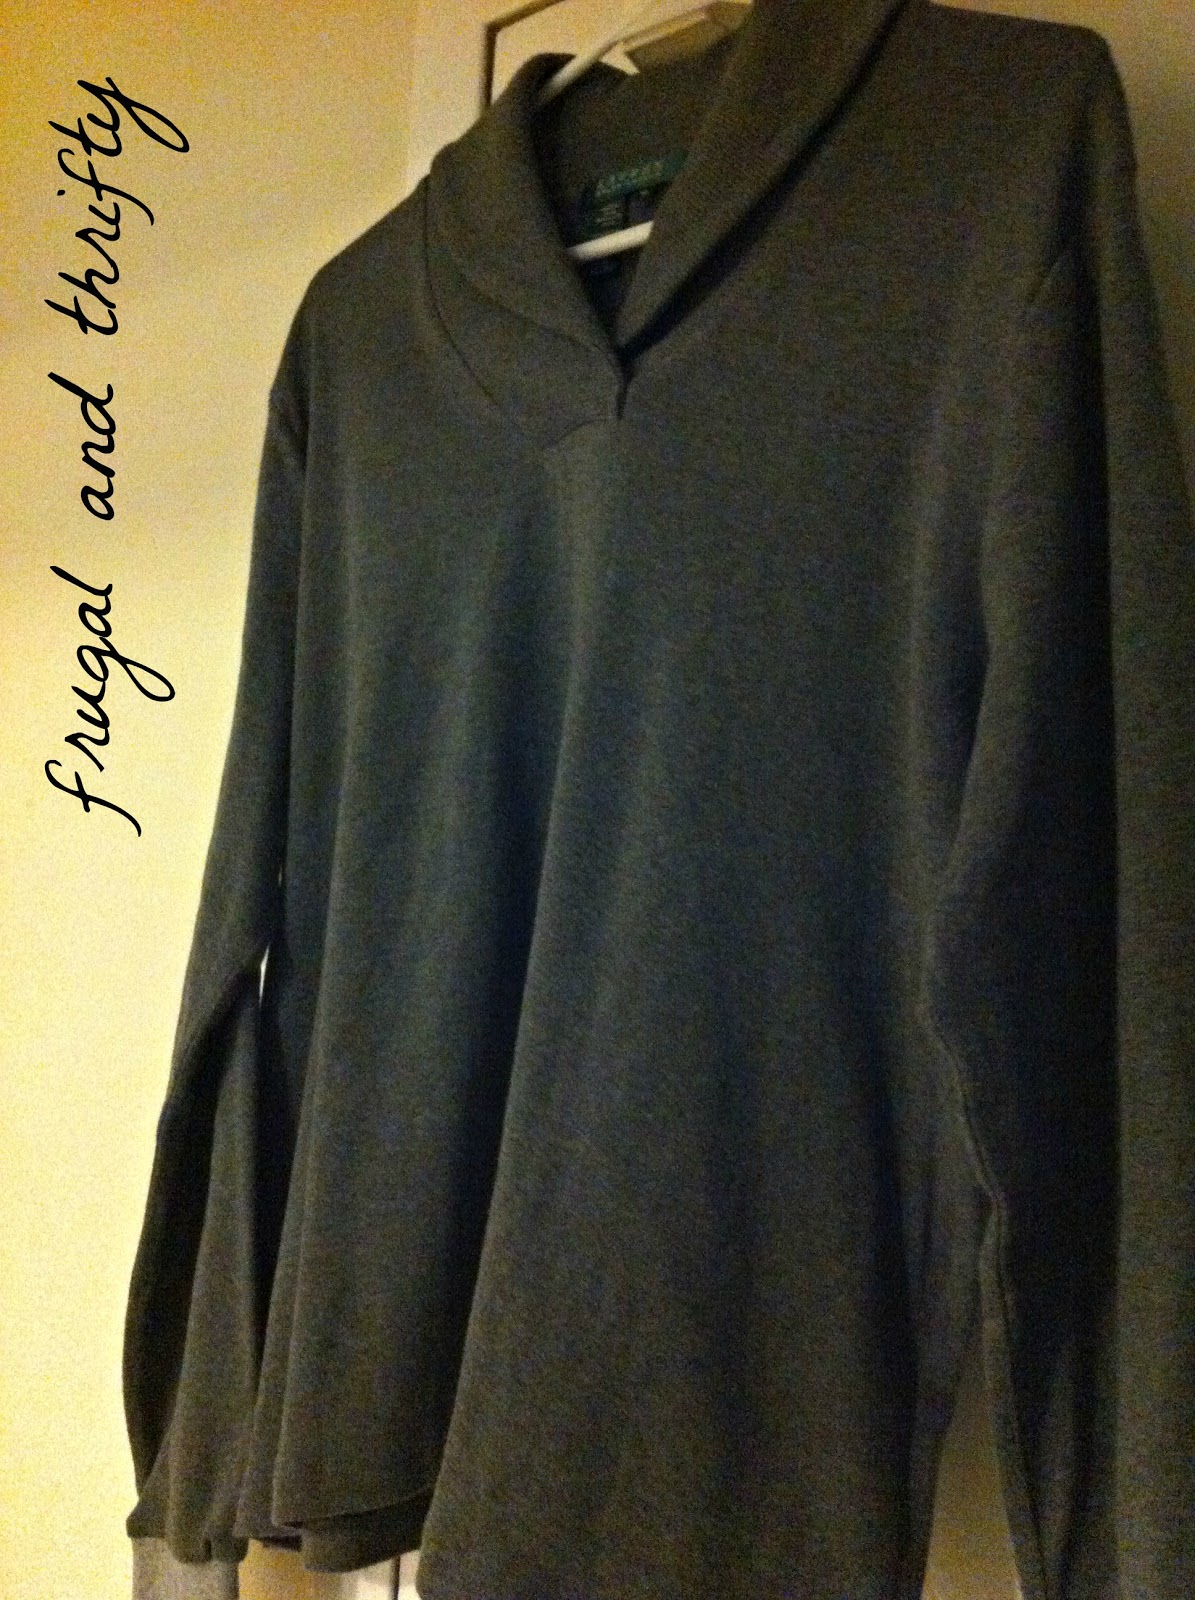 Frugal & Thrifty : Thrift Store Finds March 24.13